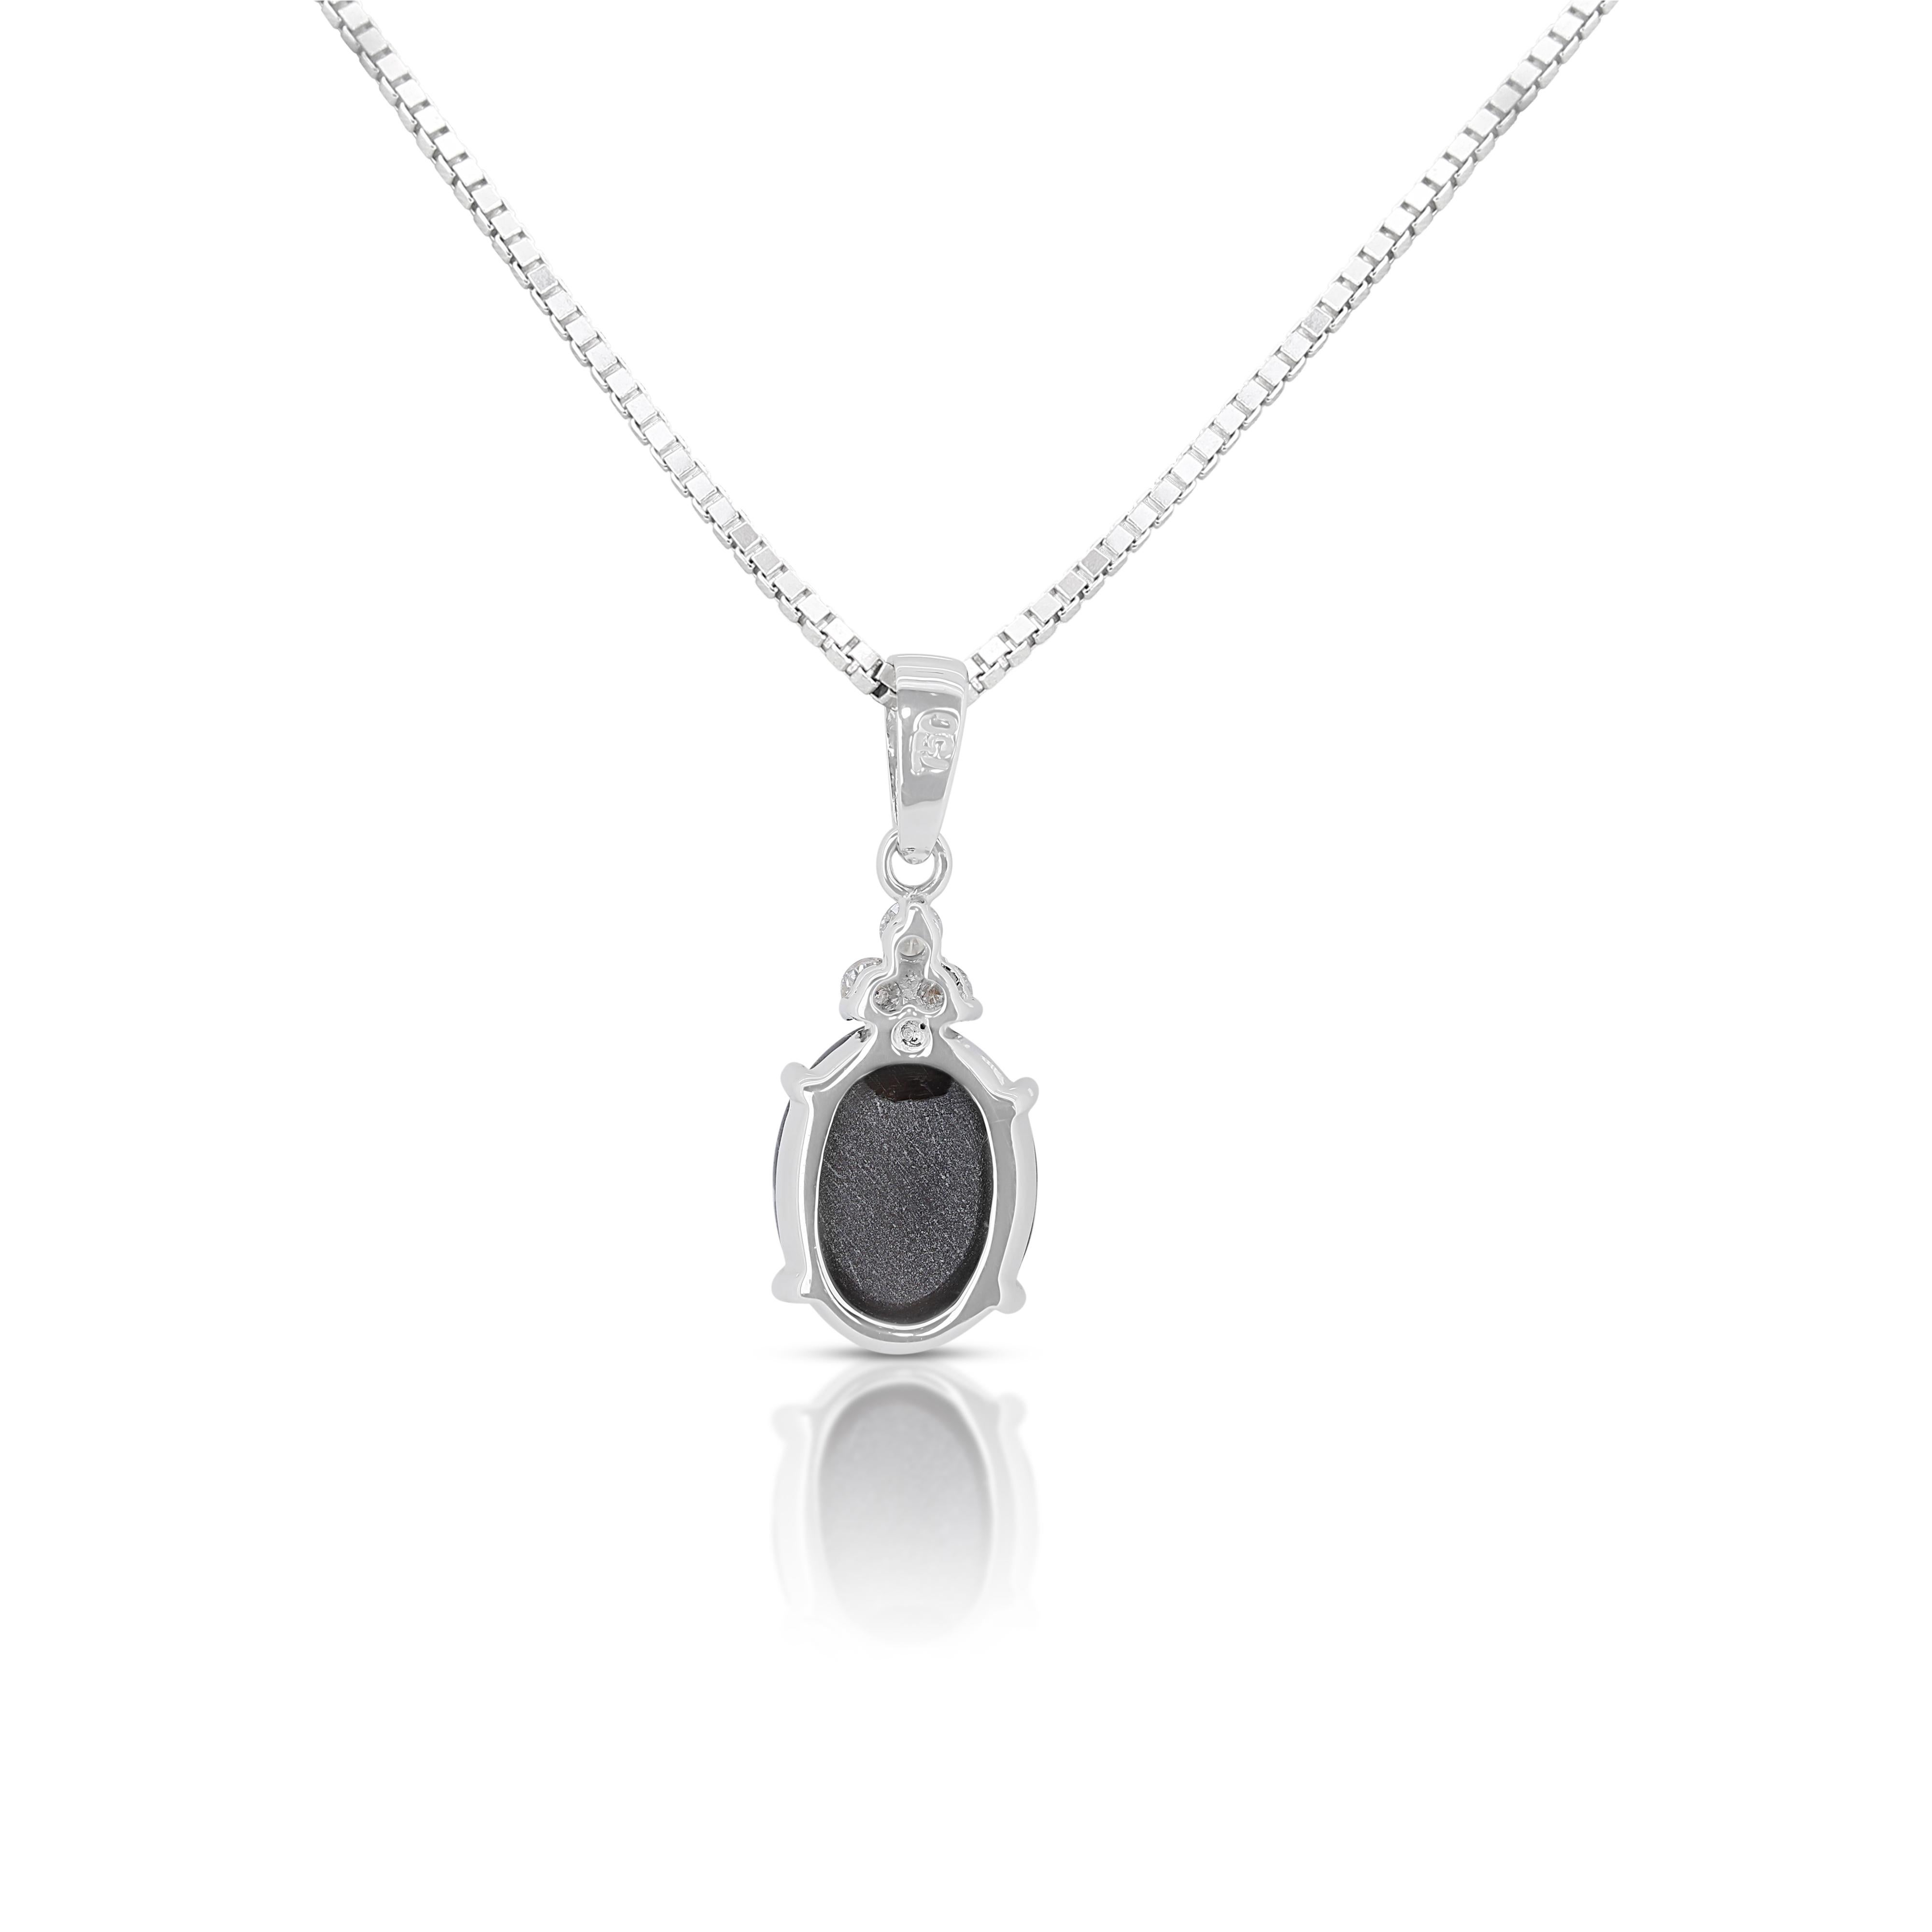 Cabochon Majestic 4.83ct Cat Eye Pendant w/ Diamonds in 18K White Gold-Chain Not Included For Sale